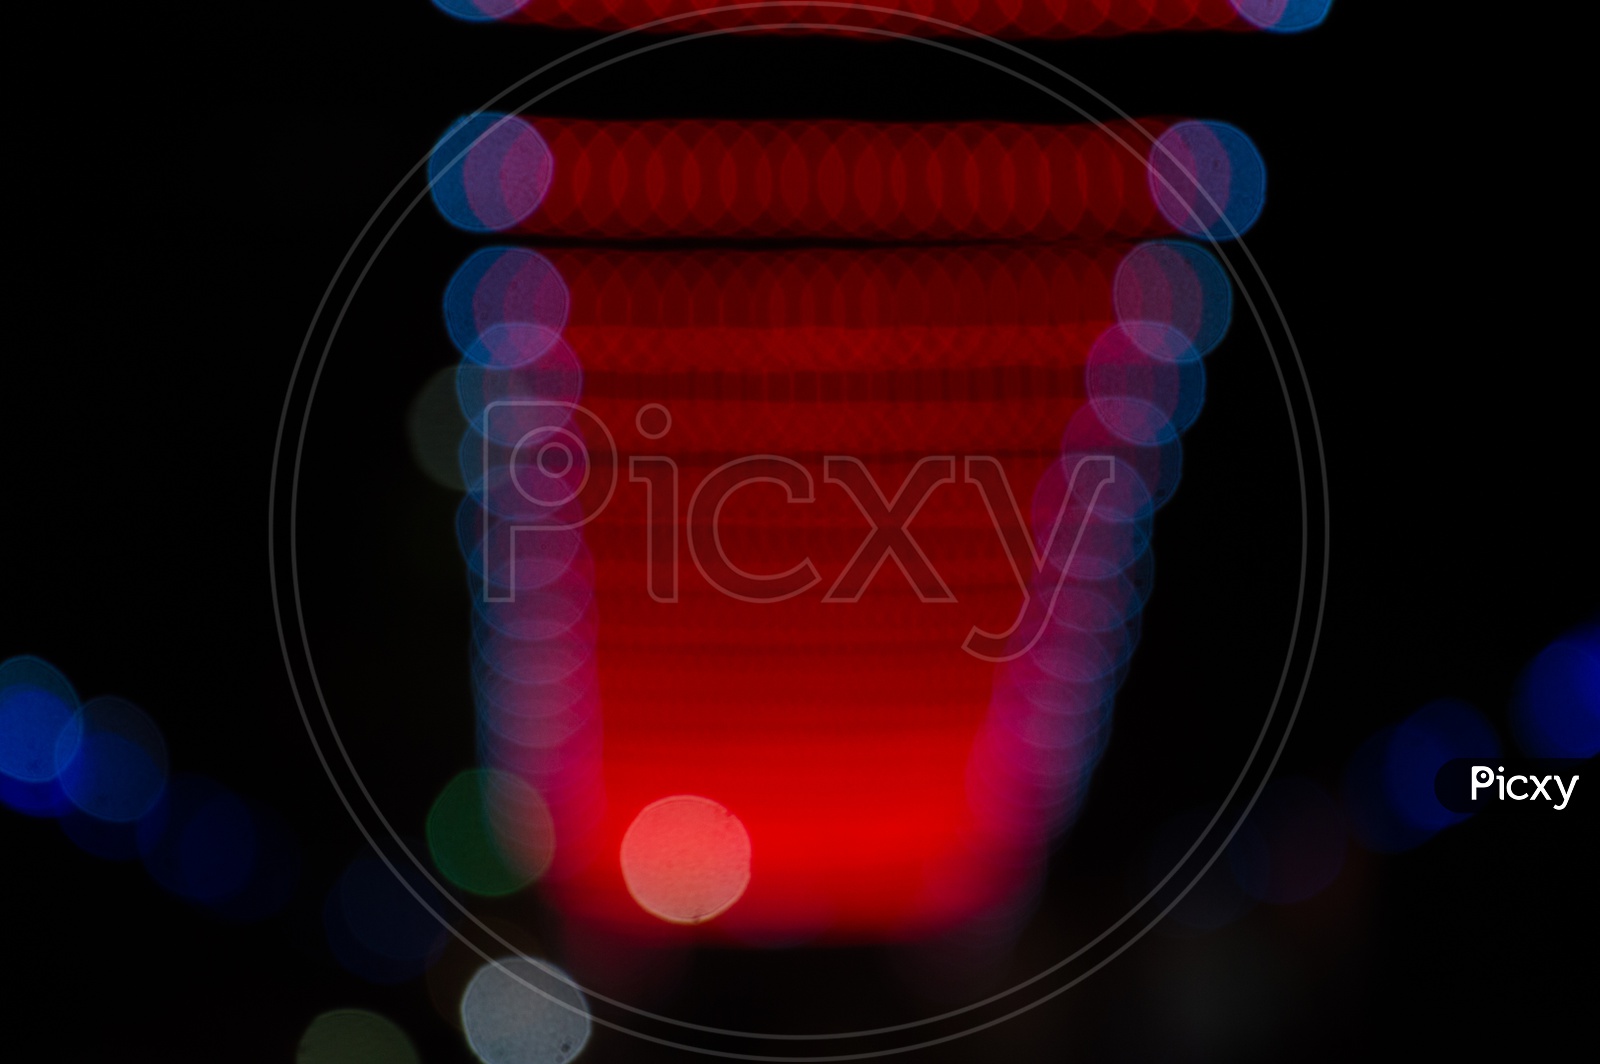 Abstract Led Light Bokeh  Patterns Background